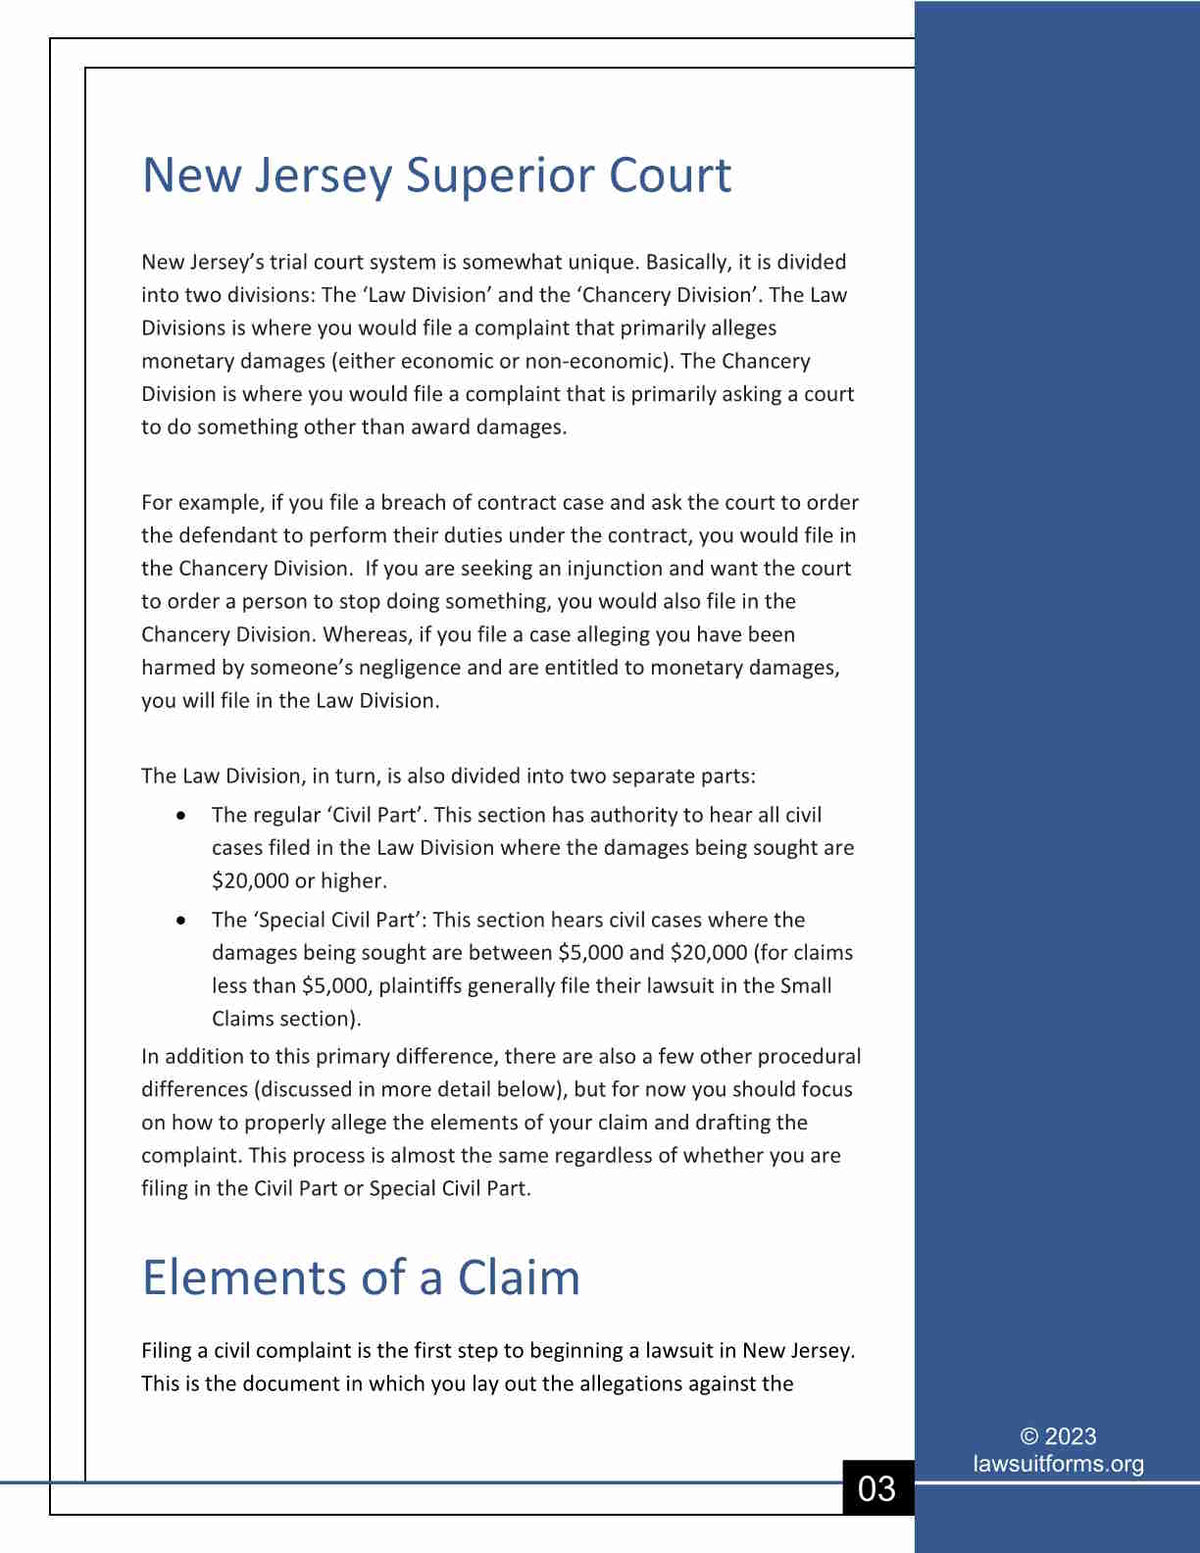 How to file a lawsuit in New Jersey